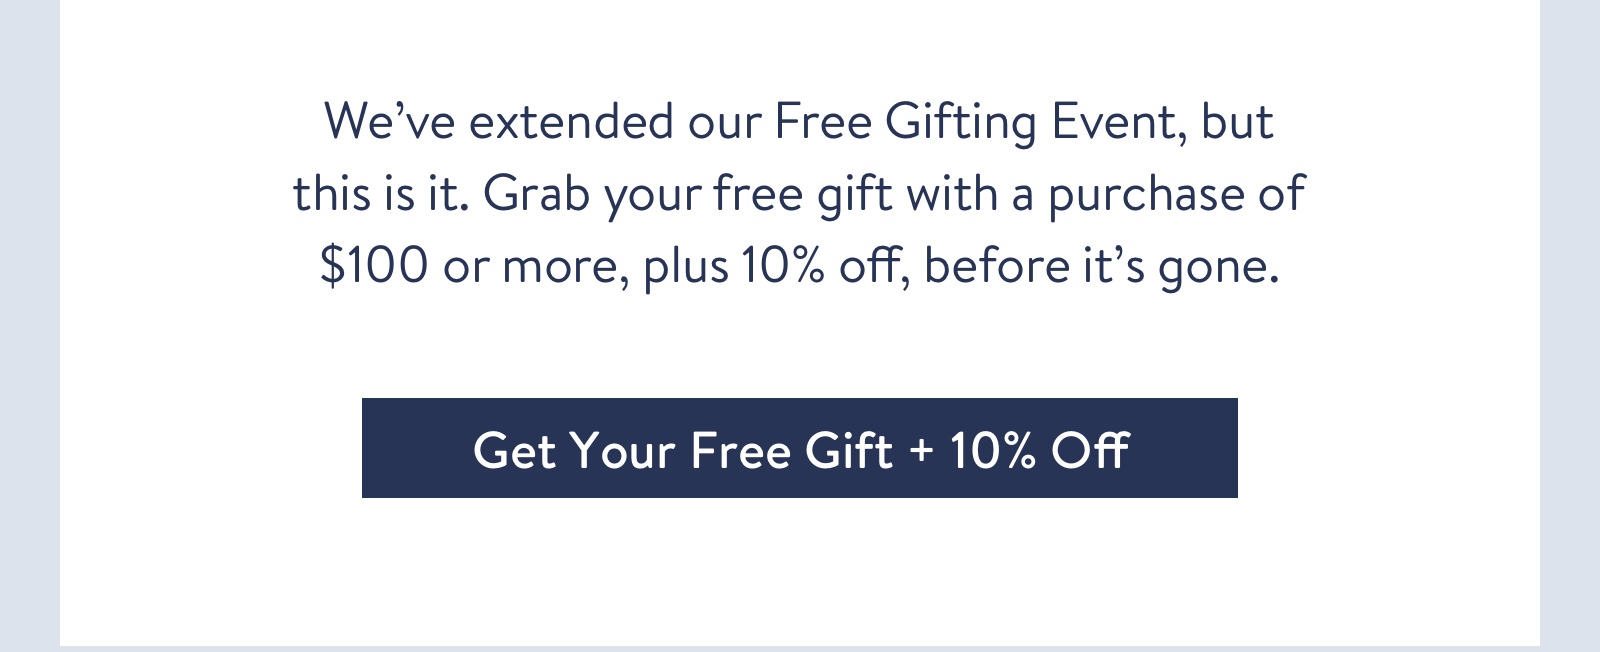 We've extended our Free Gifting Event, but this is it. Grab your free gift with a purchase of $100 or more, plus 10% off, before it's gone for good.